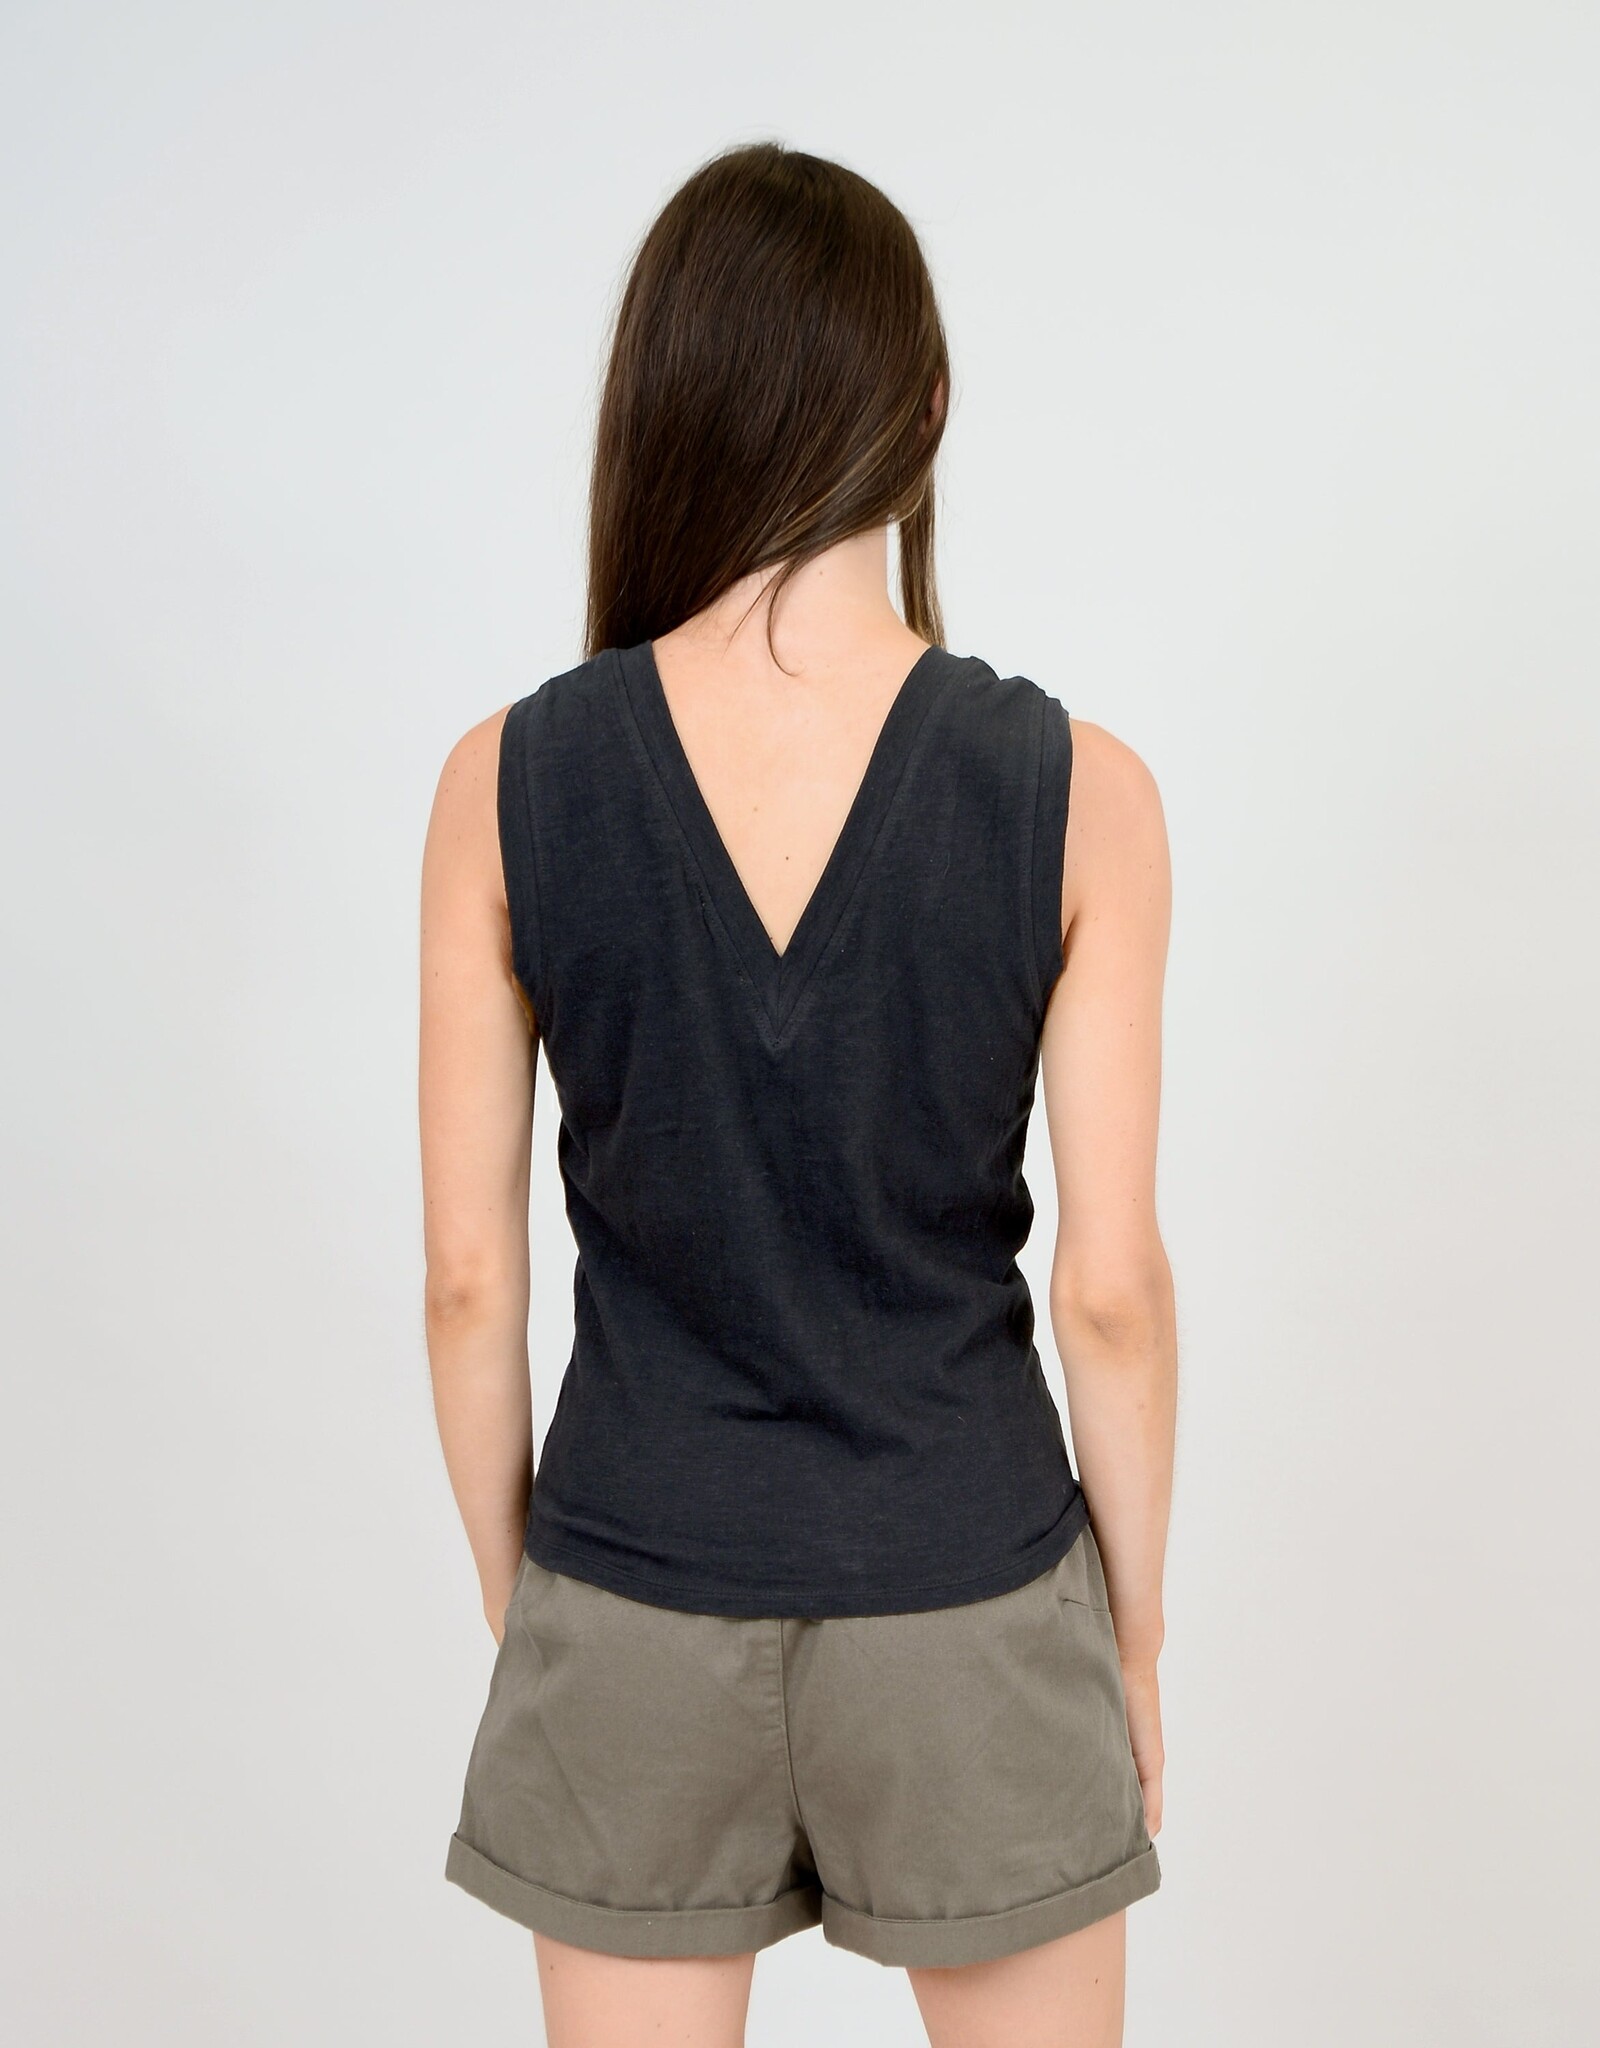 RD Style RD Revy Reversible Tank